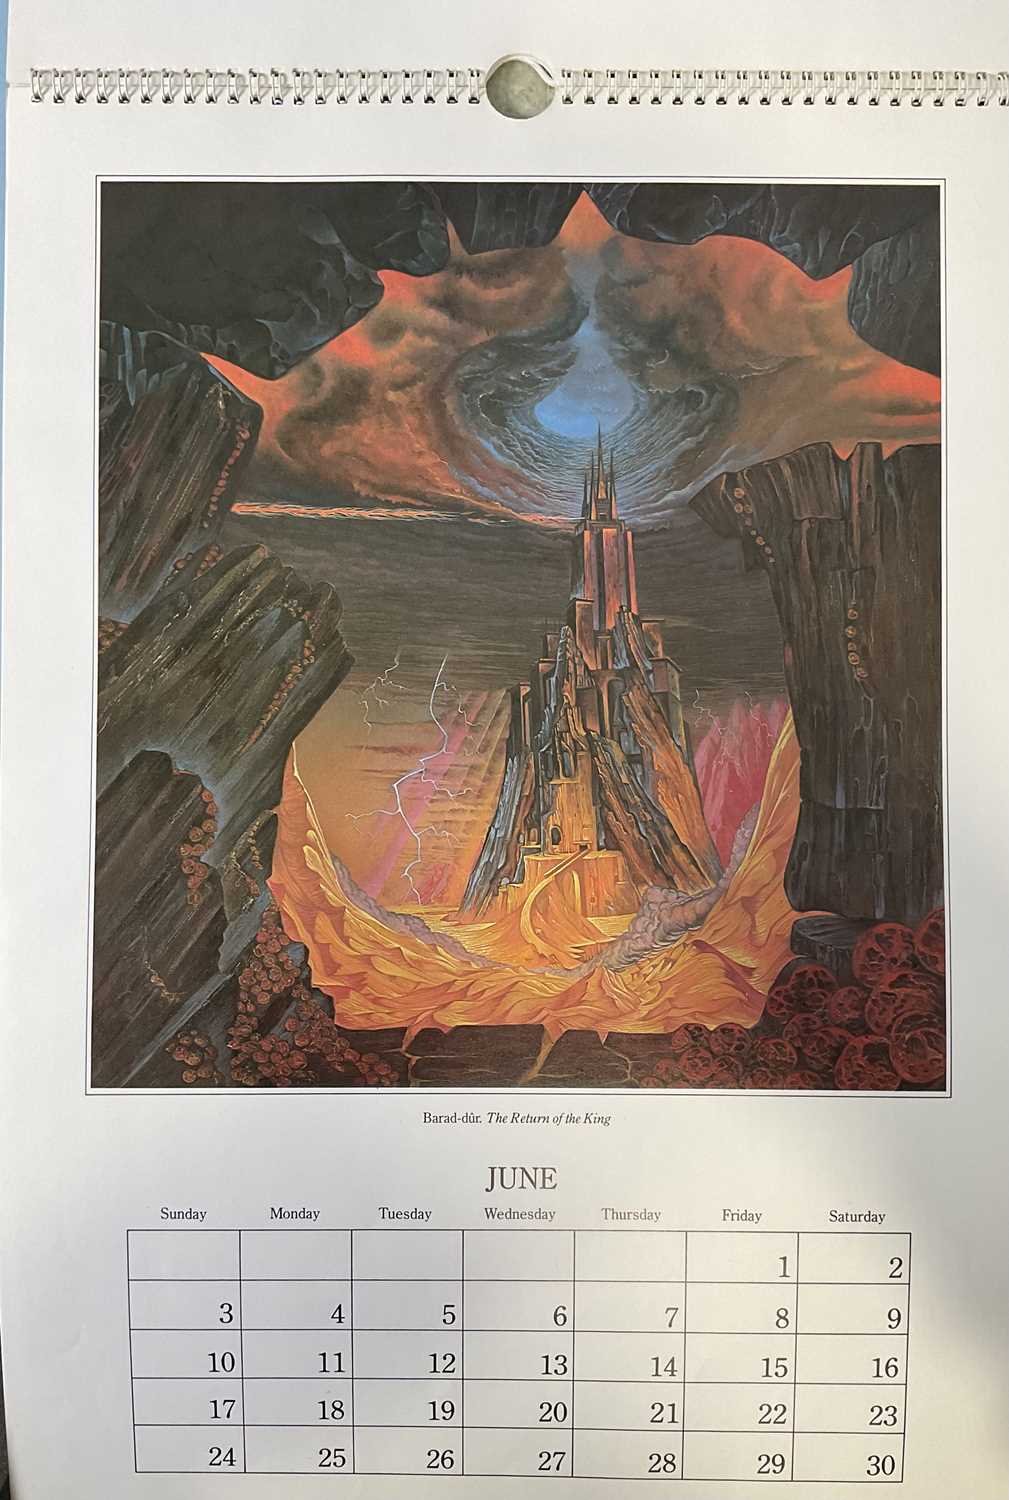 LORD OF THE RINGS Memorabilia - 'The Tolkien Calendar' 1984-1992, 9 calendars illustrated with - Image 2 of 6